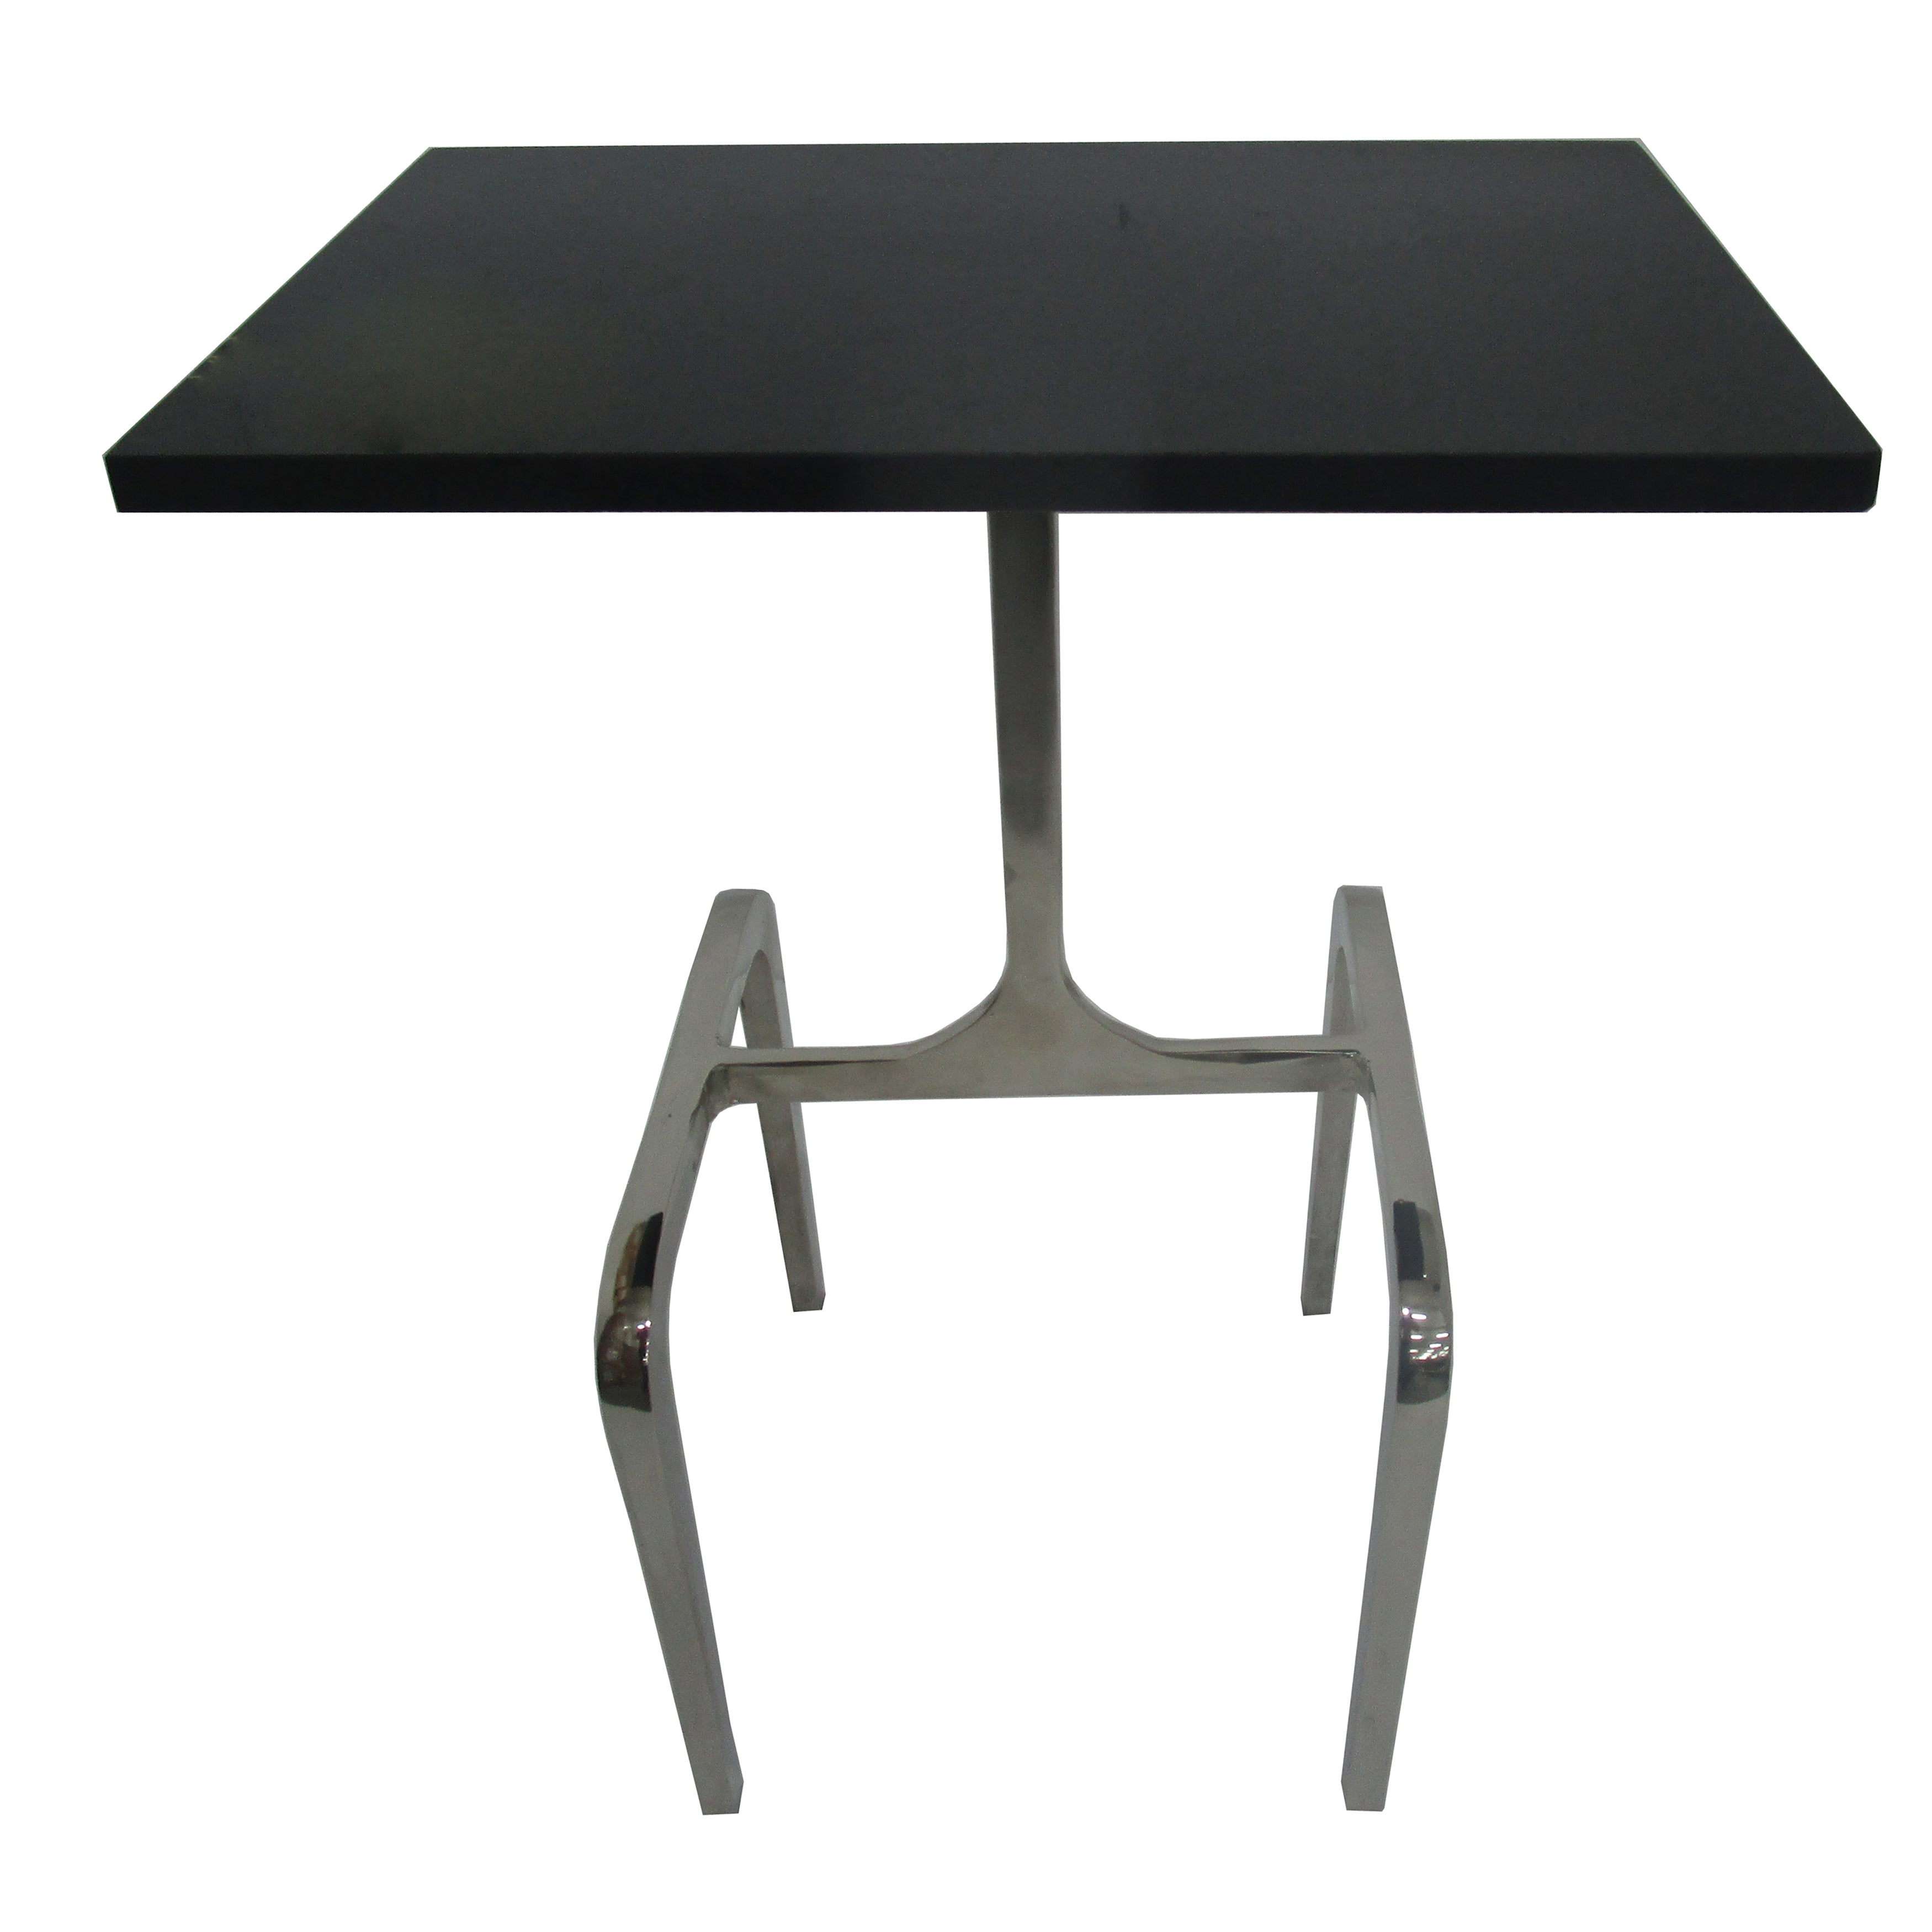 22" 4-Legged Accent Table, Black Marble, Nickel